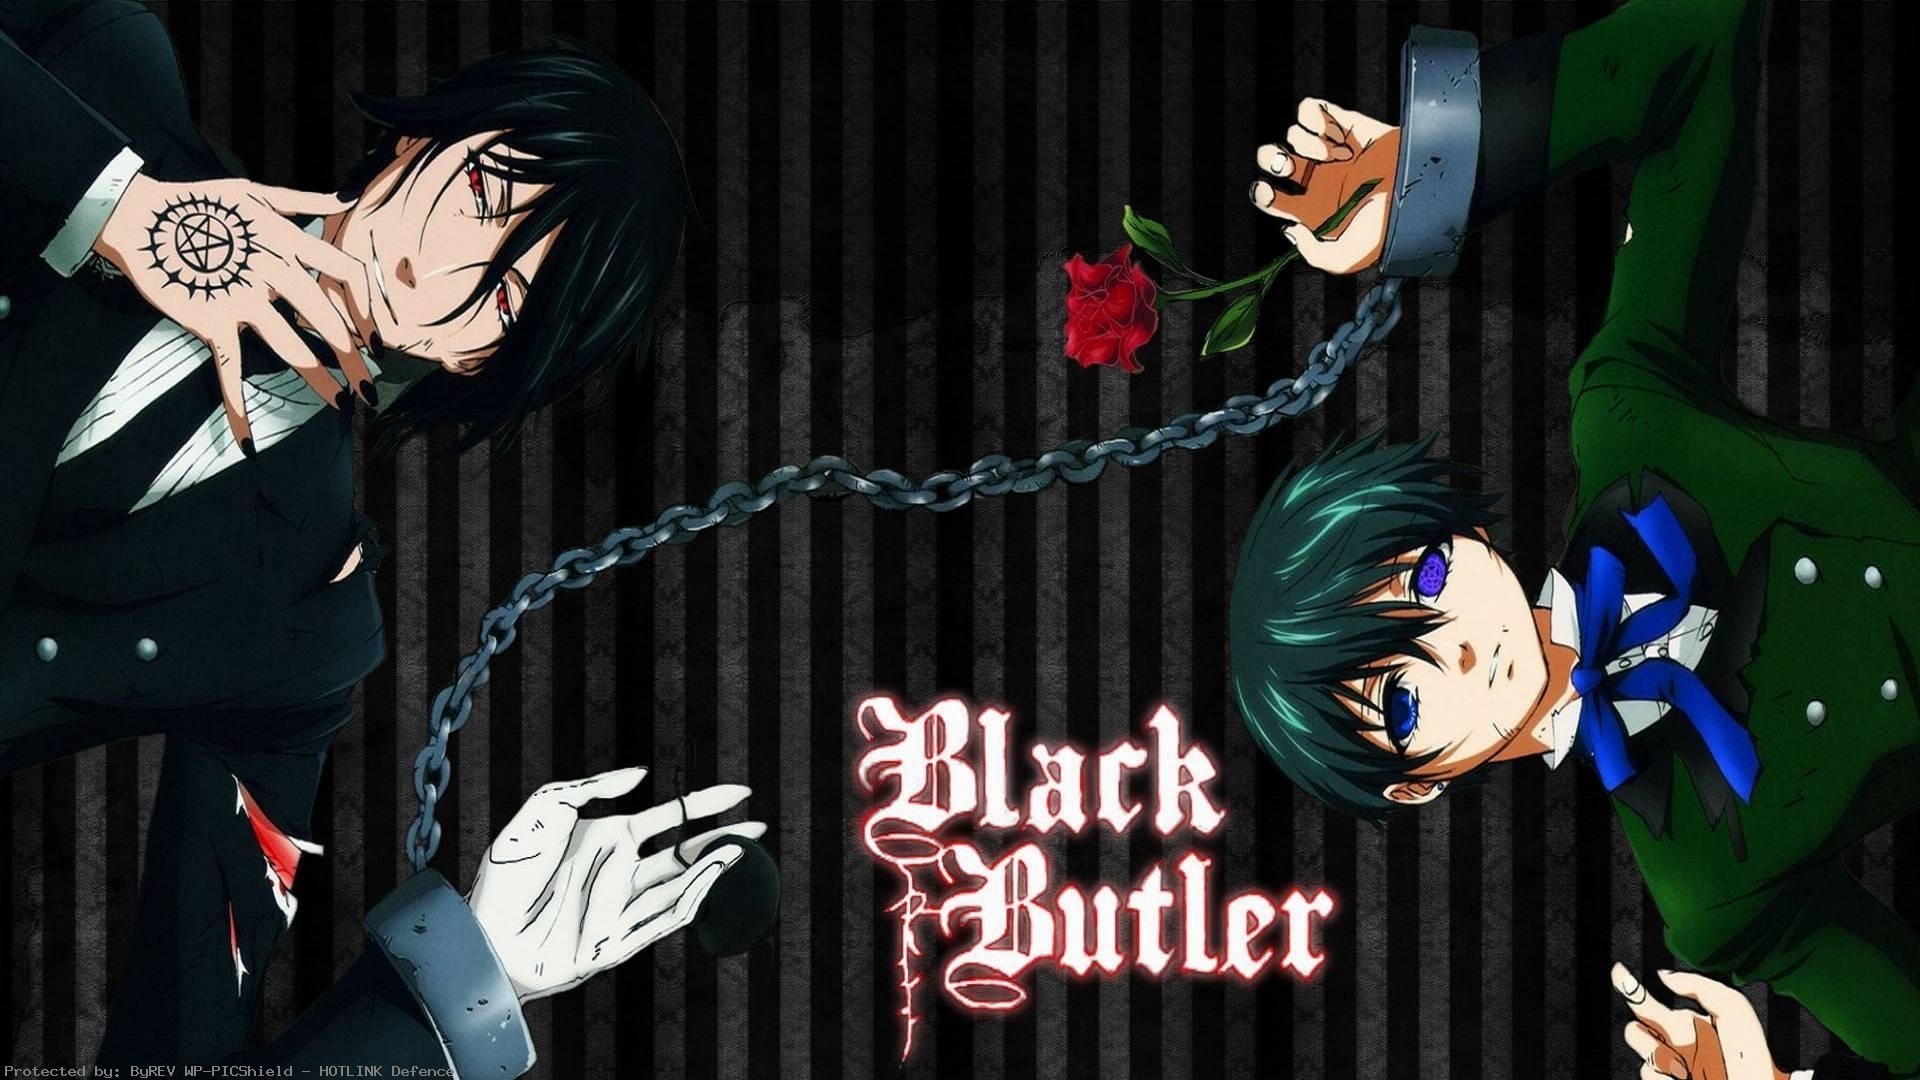 1920x1080 free-computer-for-black-butler-1920-x-1080-